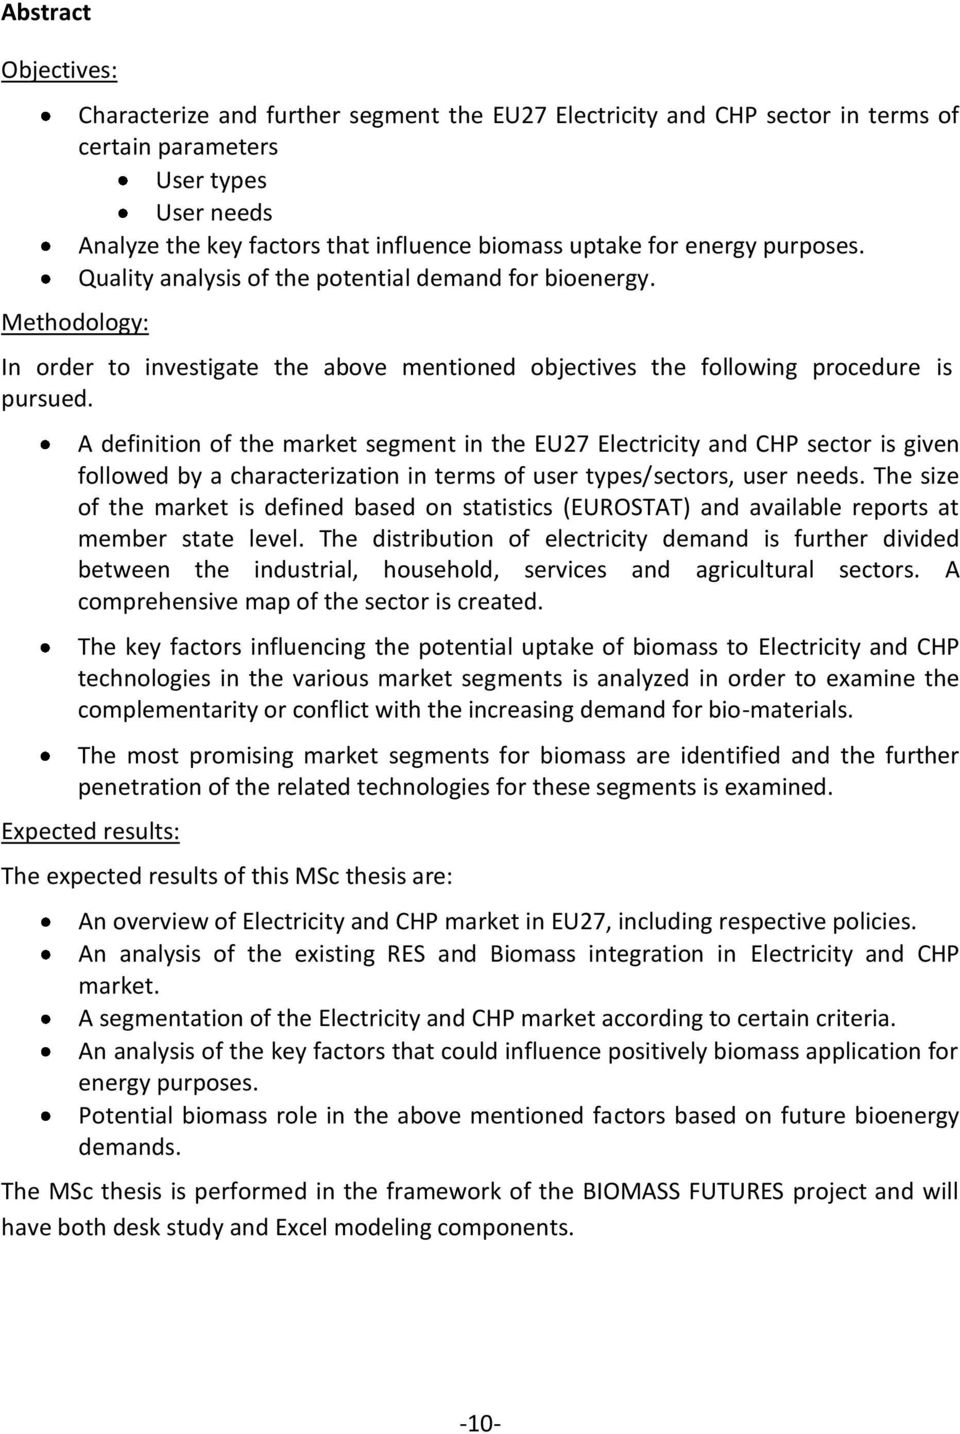 A definition of the market segment in the EU27 Electricity and CHP sector is given followed by a characterization in terms of user types/sectors, user needs.